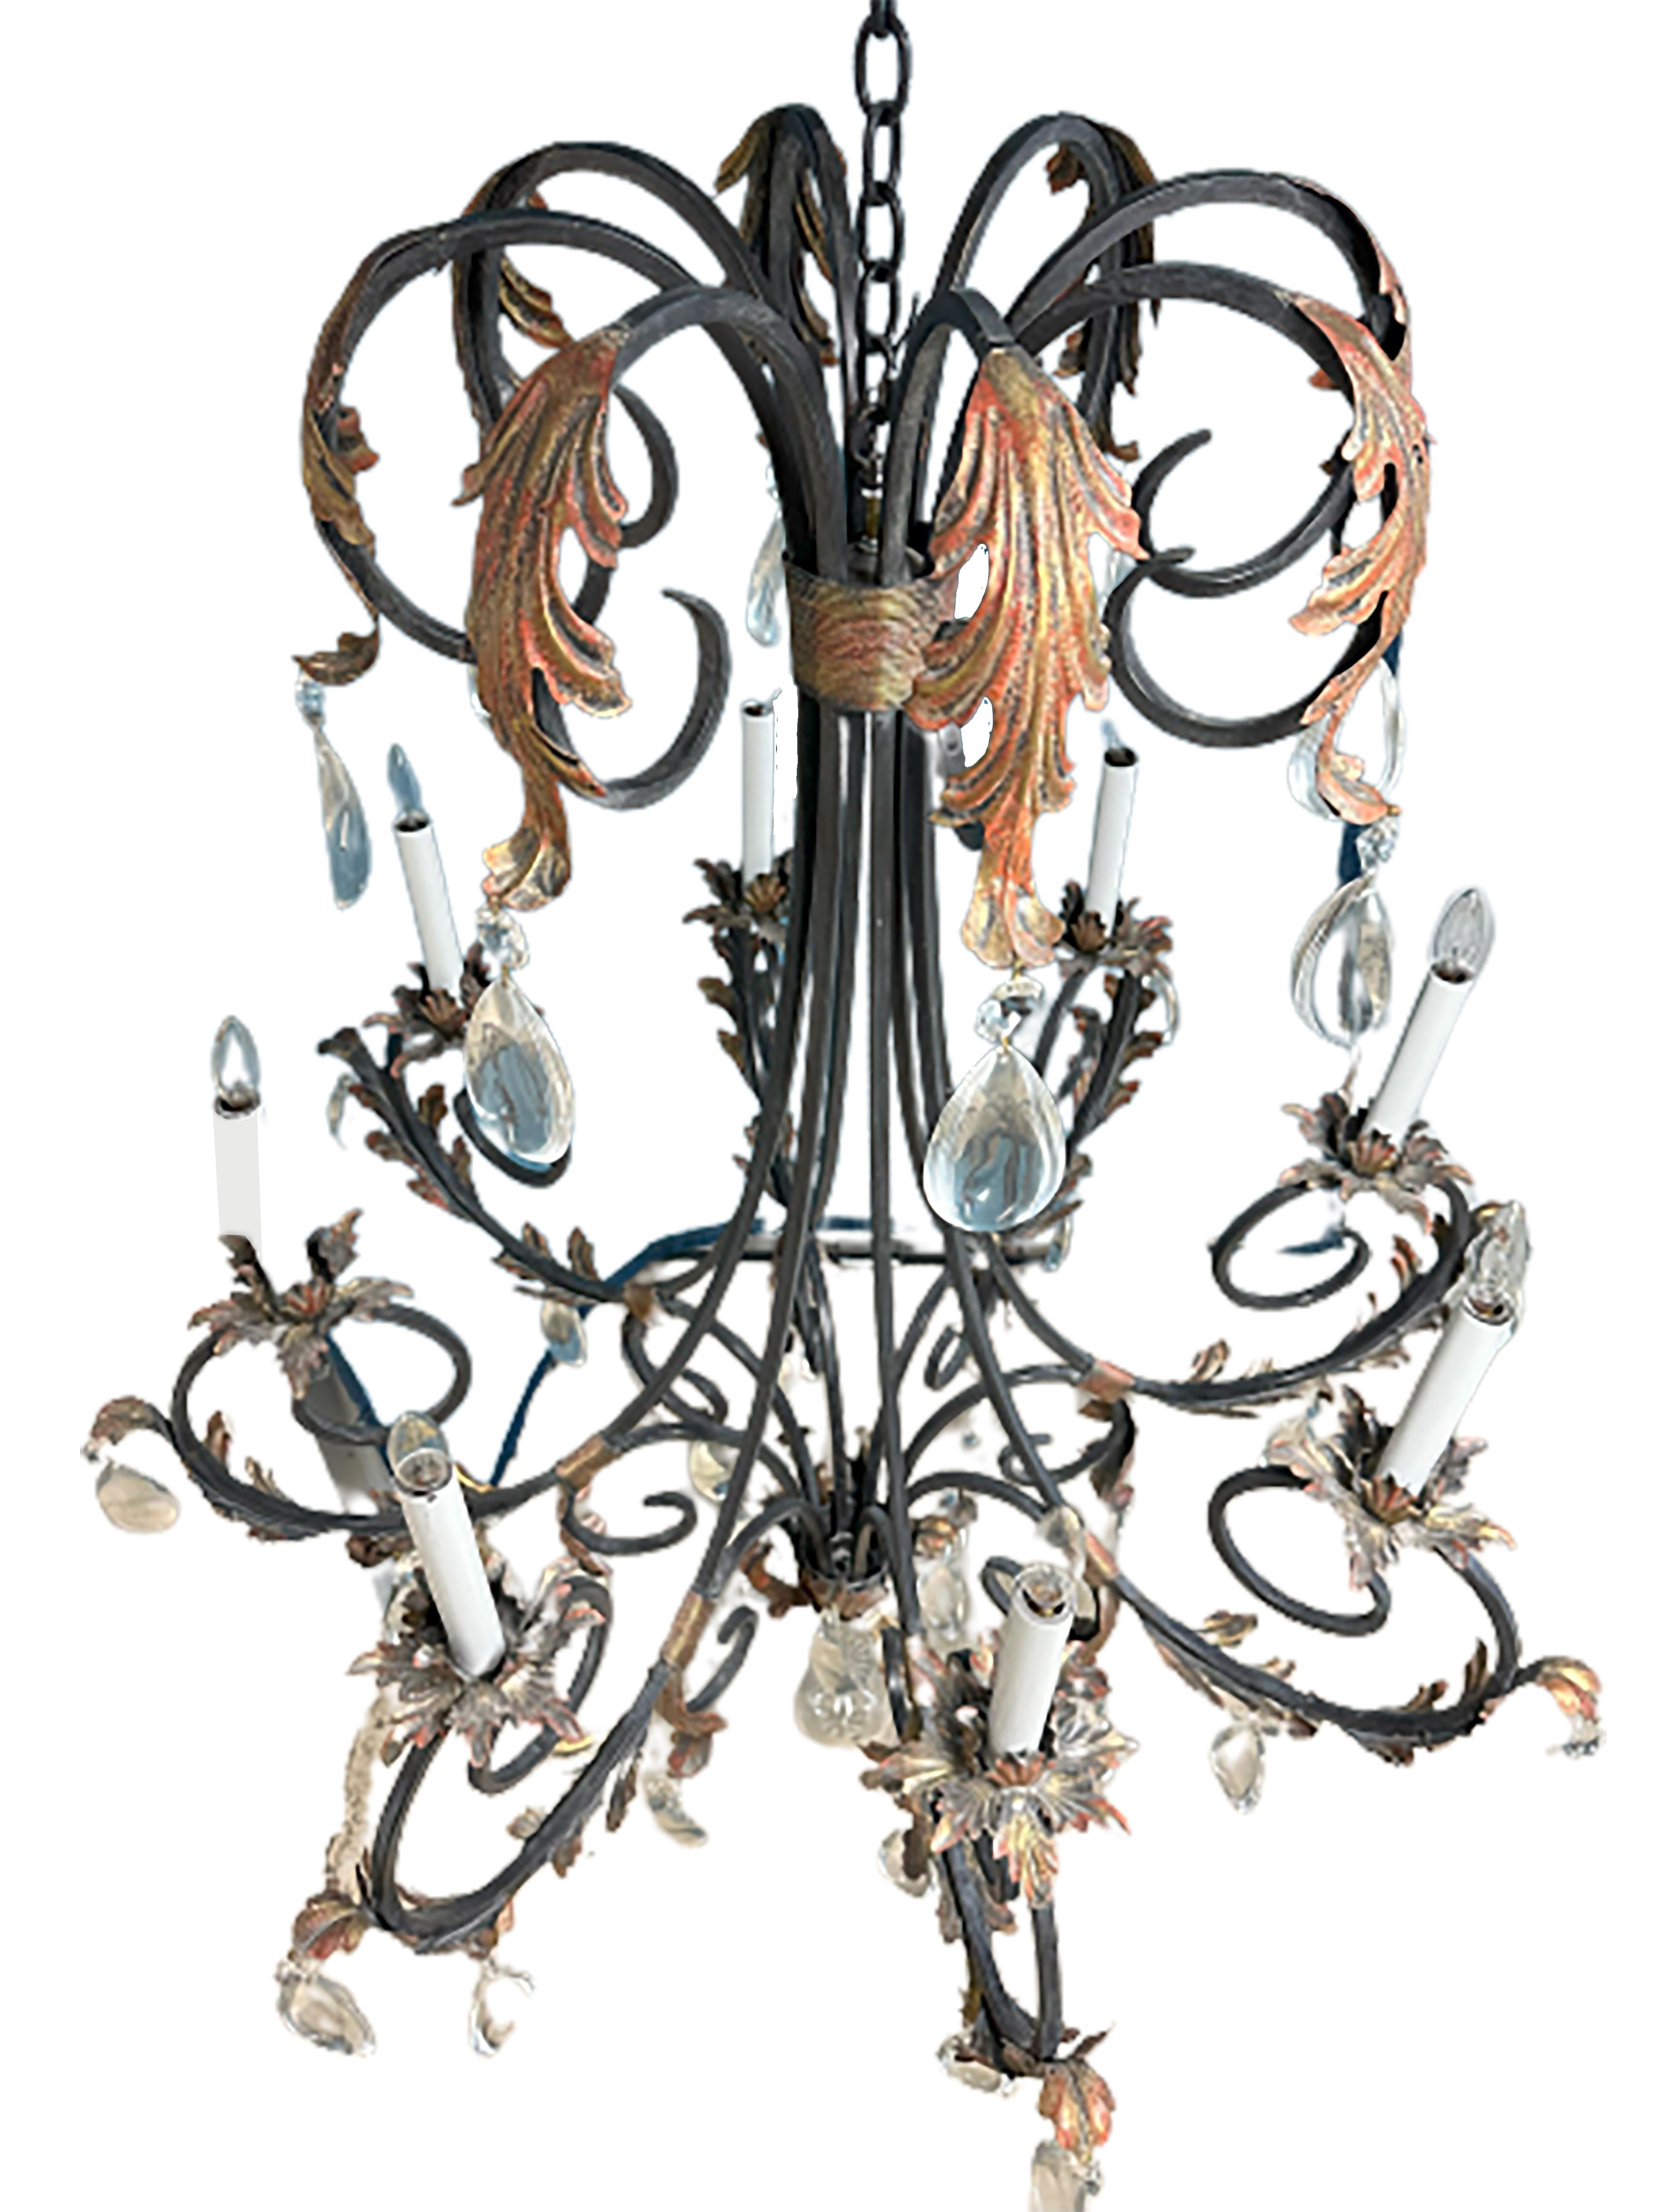 A handsome pair of handmade French style chandeliers. Early 21st century made. Wrought iron with frenchScrolls and acanthus leaves. Rock Crystal Droplets adorn the structure. 

In very good condition. Some gentle wear consistent with age and